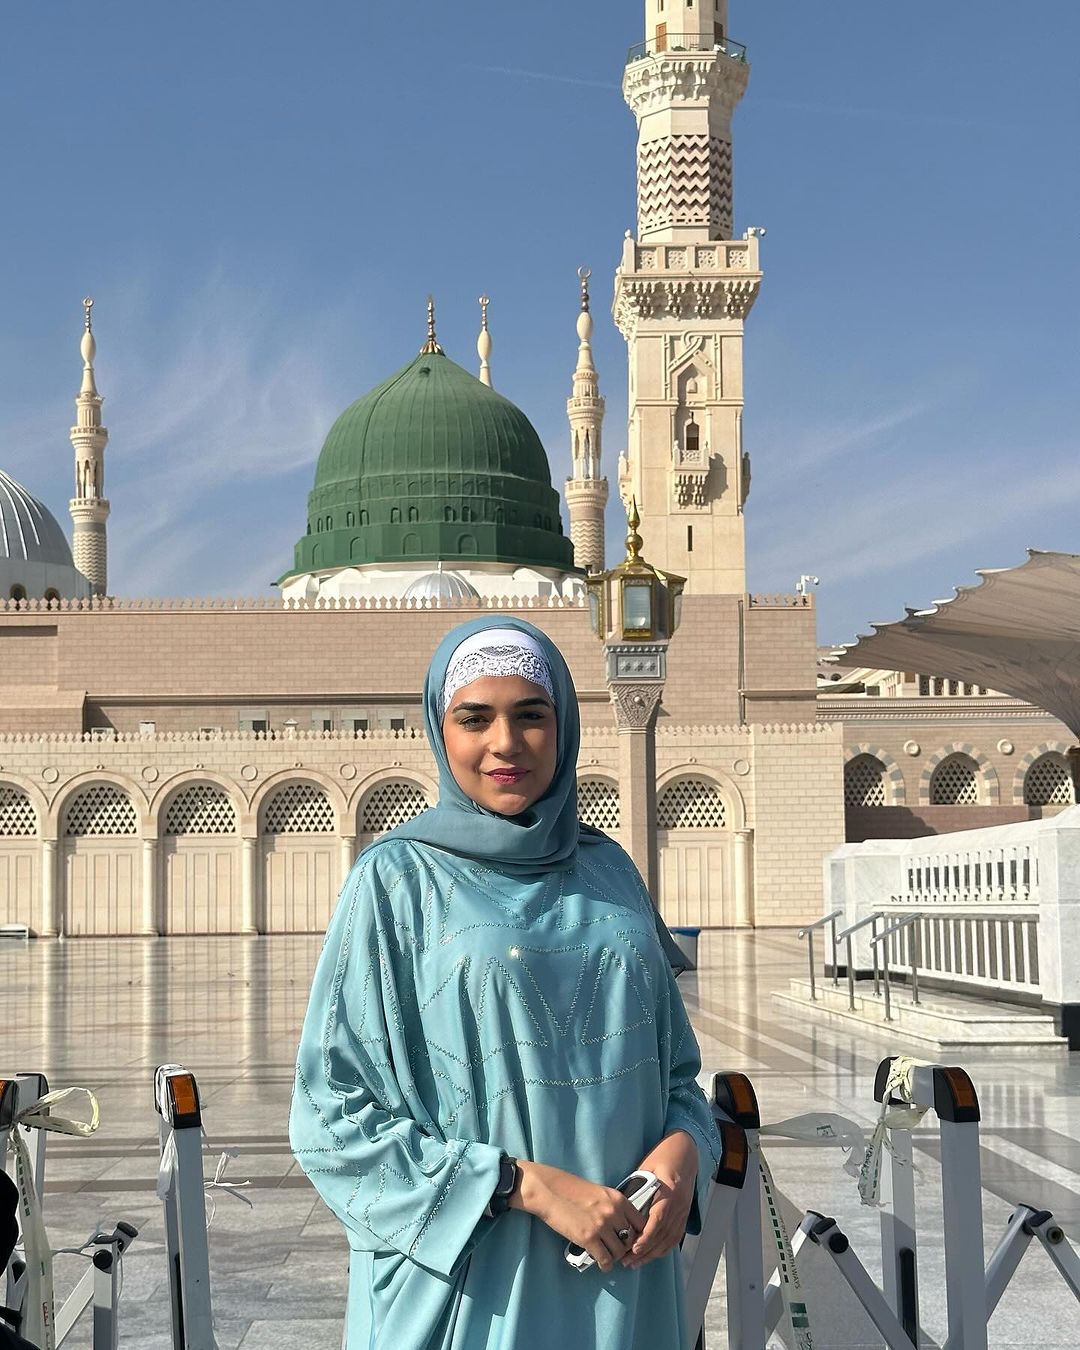 Kundali Bhagya Fame Actress Anjum Fakih Expressed Gratitude To The Almighty. Read On To Know About Her Spiritual Trip To Mecca And Medina!